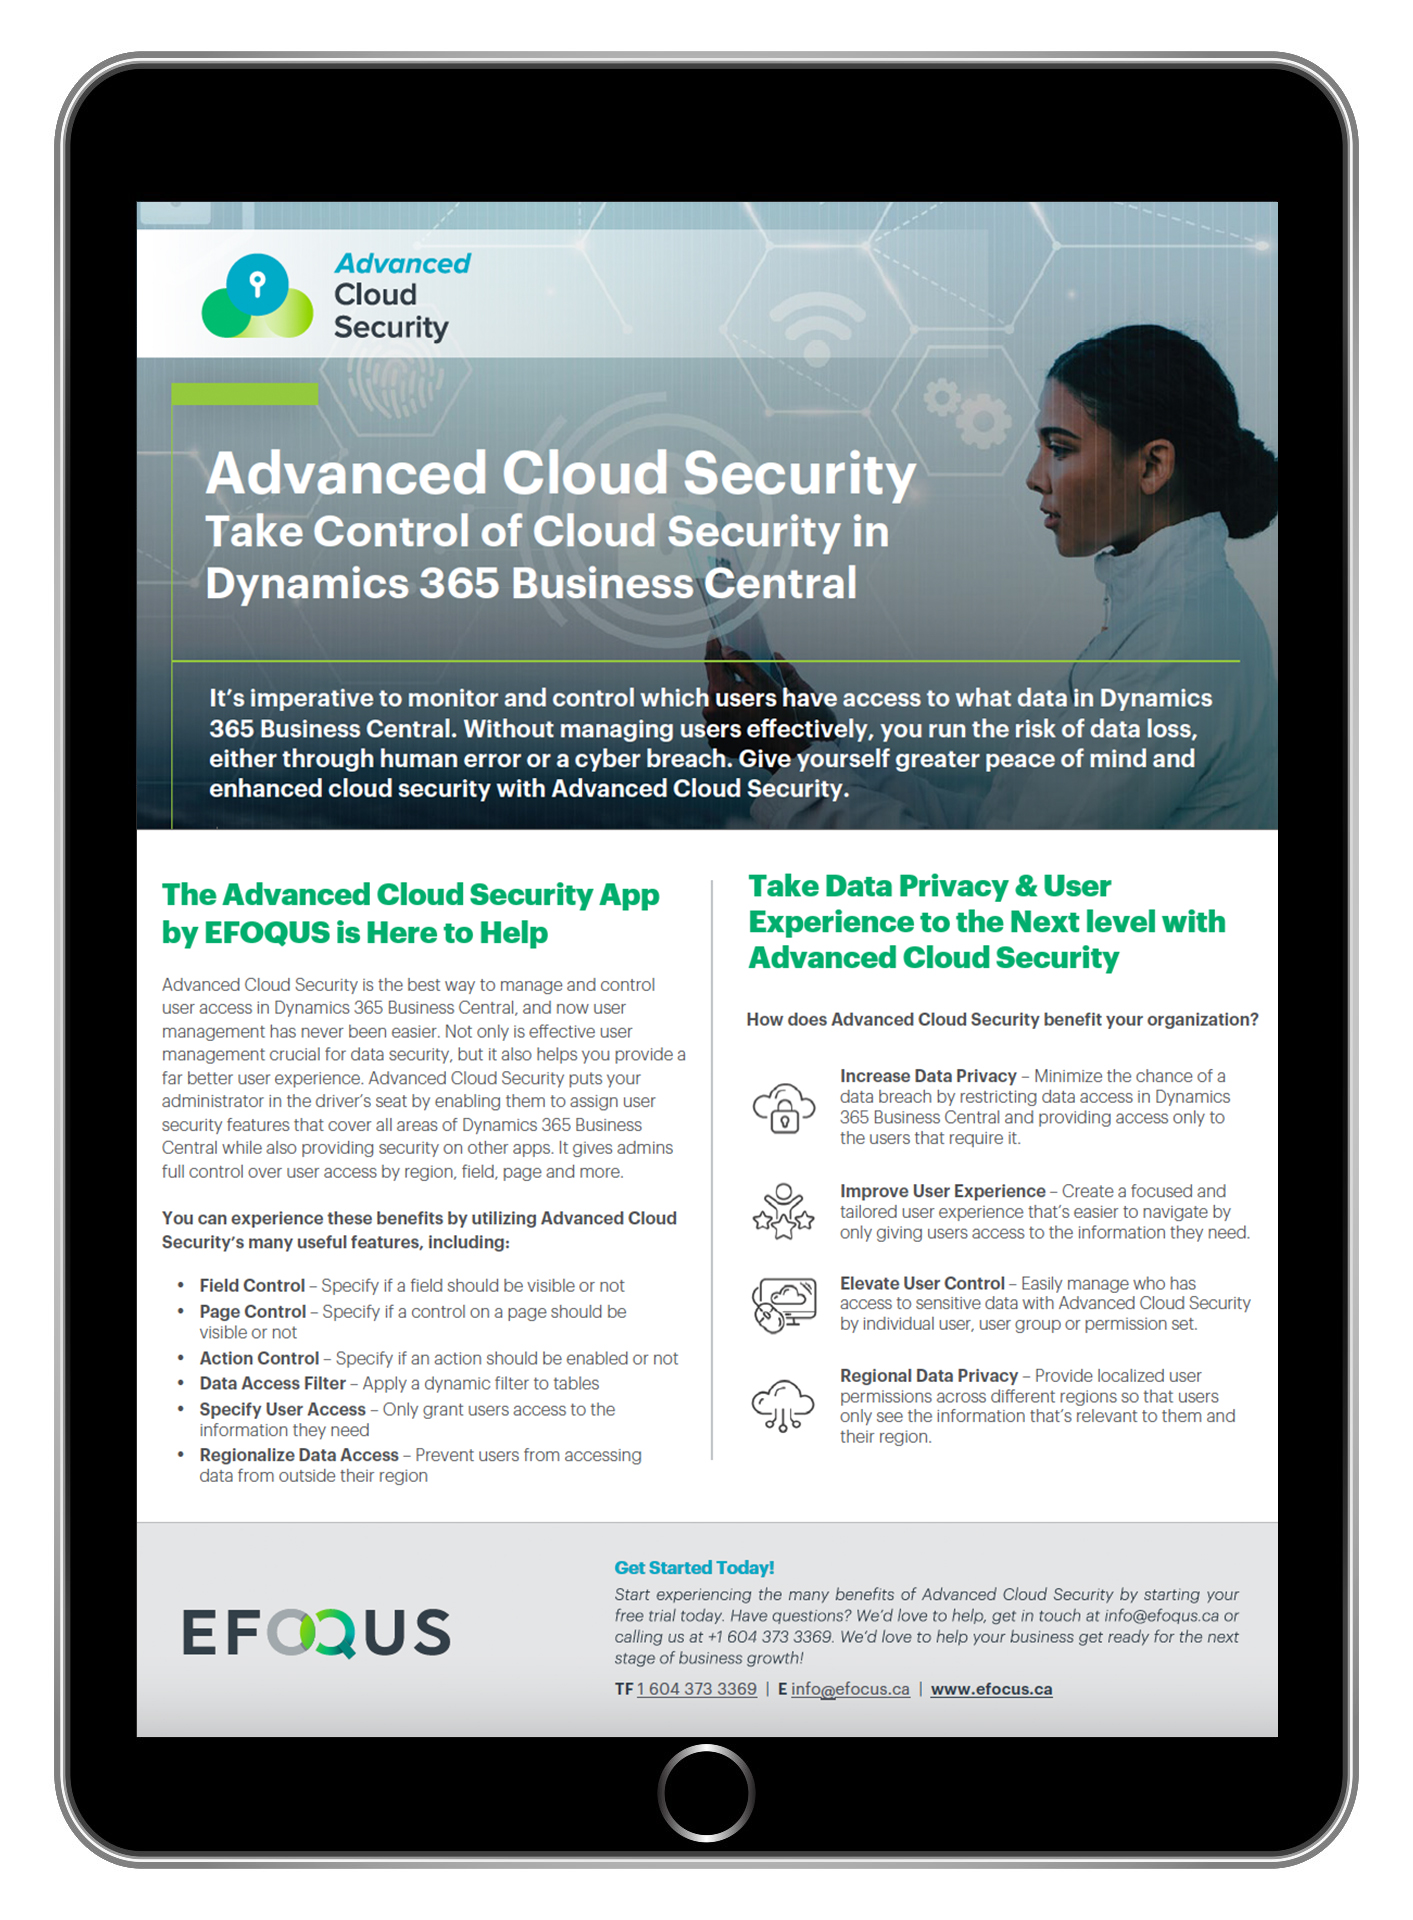 download your guide on dynamics 365 advanced cloud security